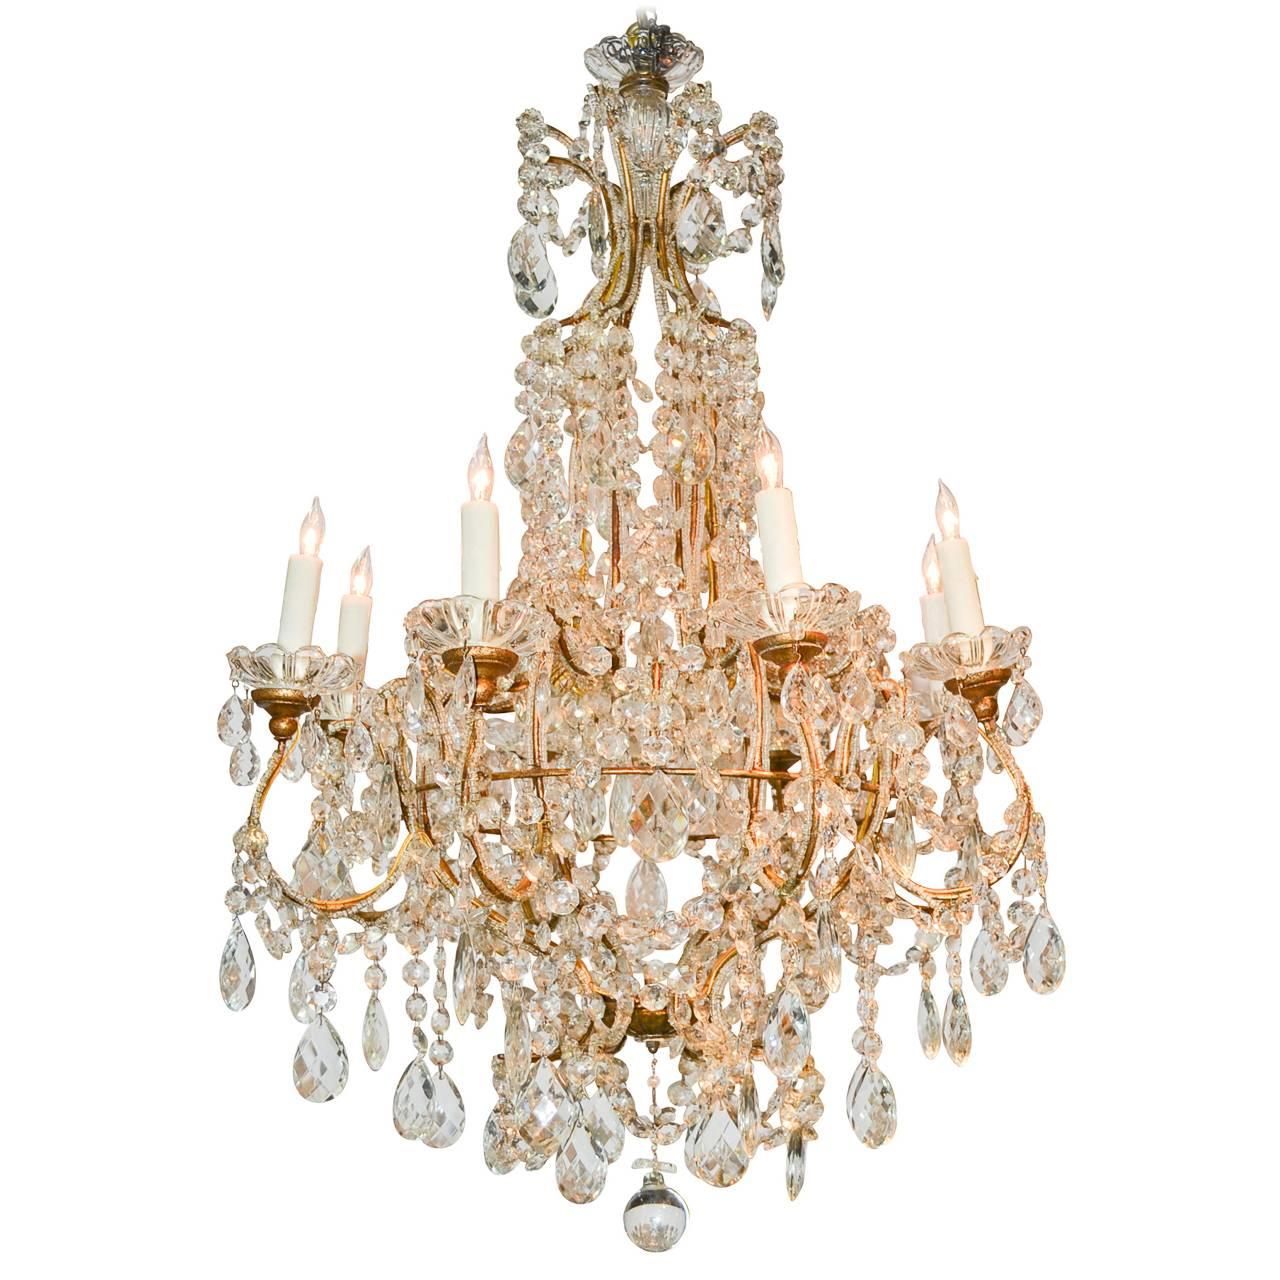 Lovely French Crystal Chandelier